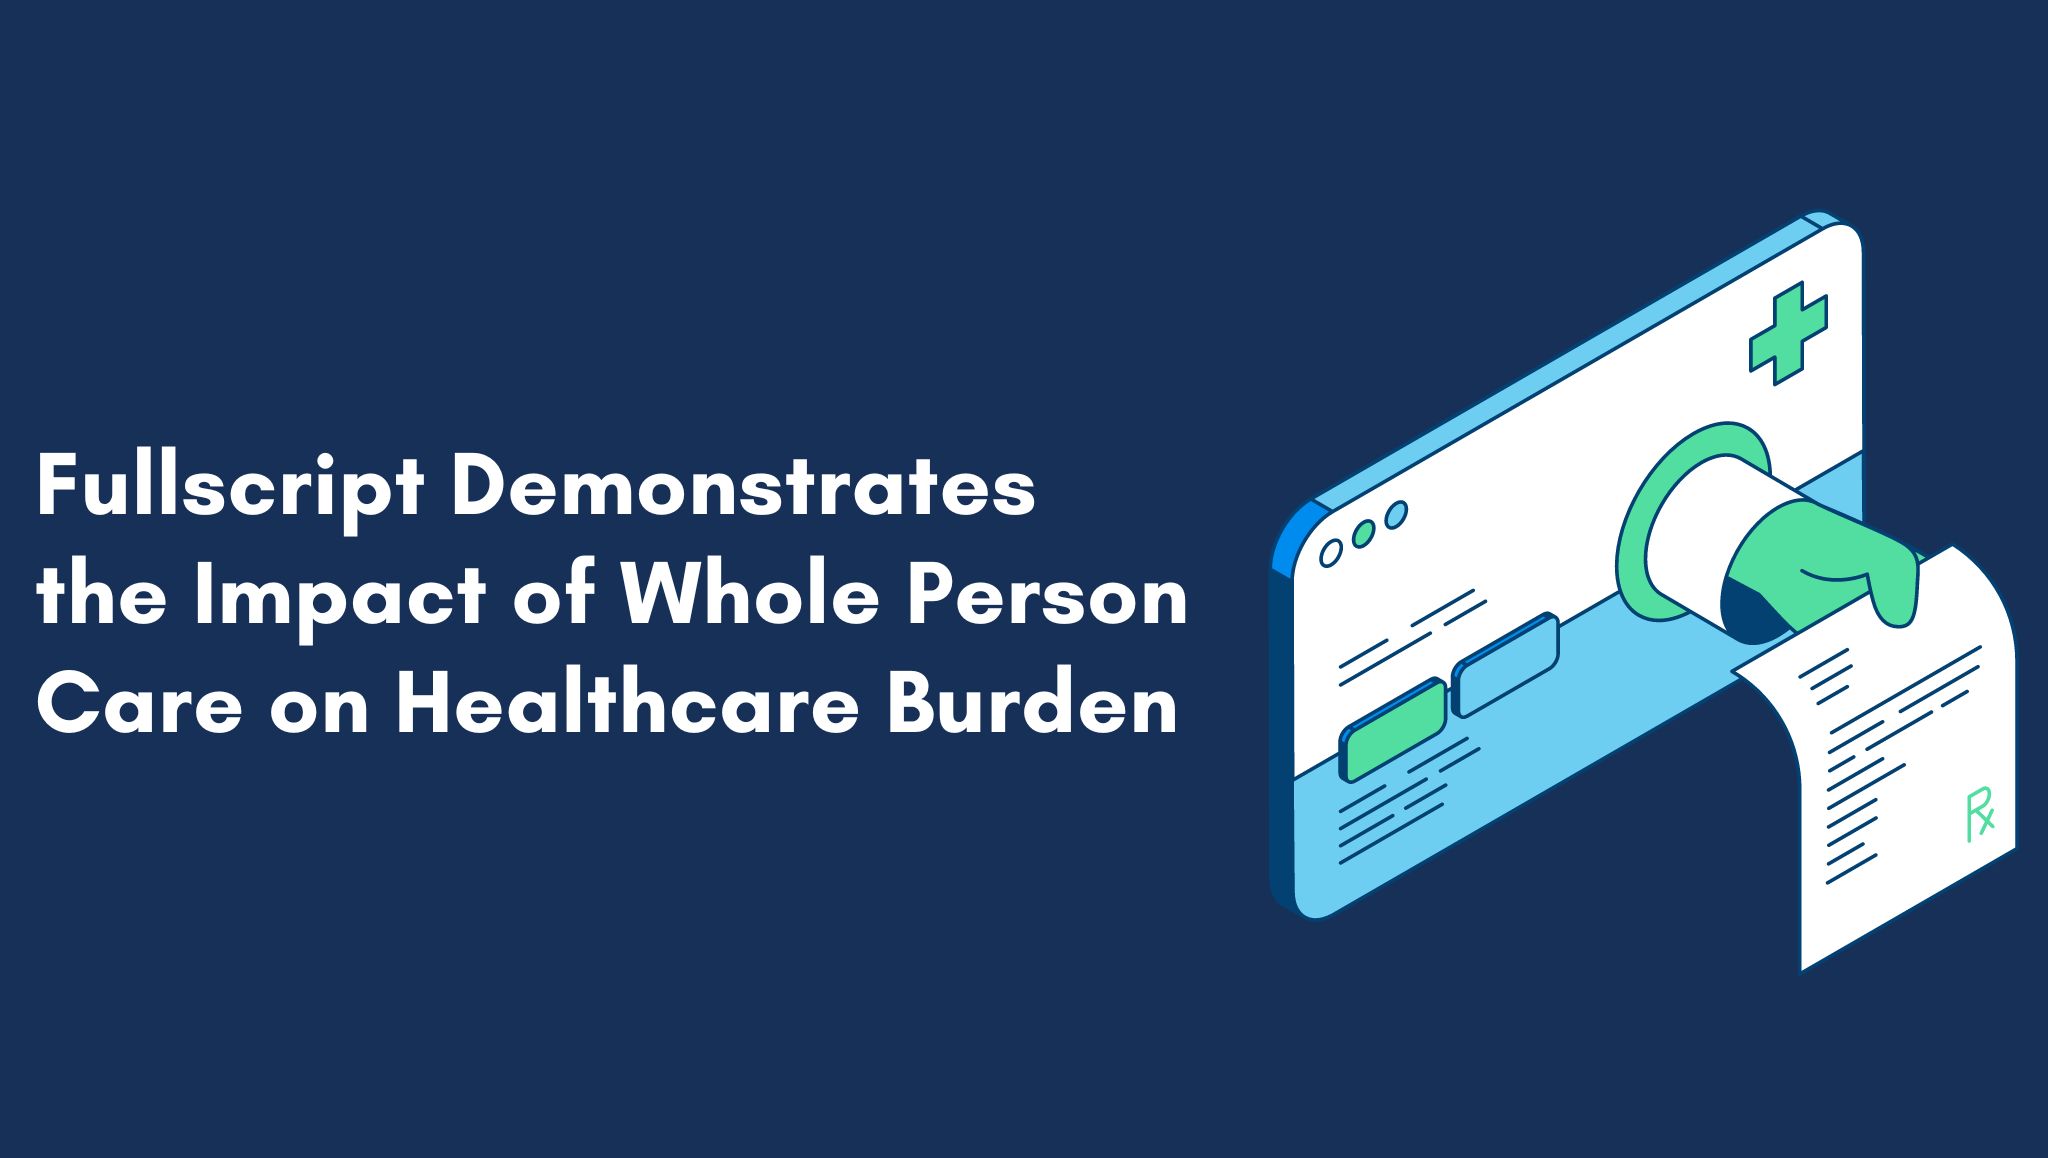 Fullscript Demonstrates the Impact of Whole Person Care on Healthcare Burden